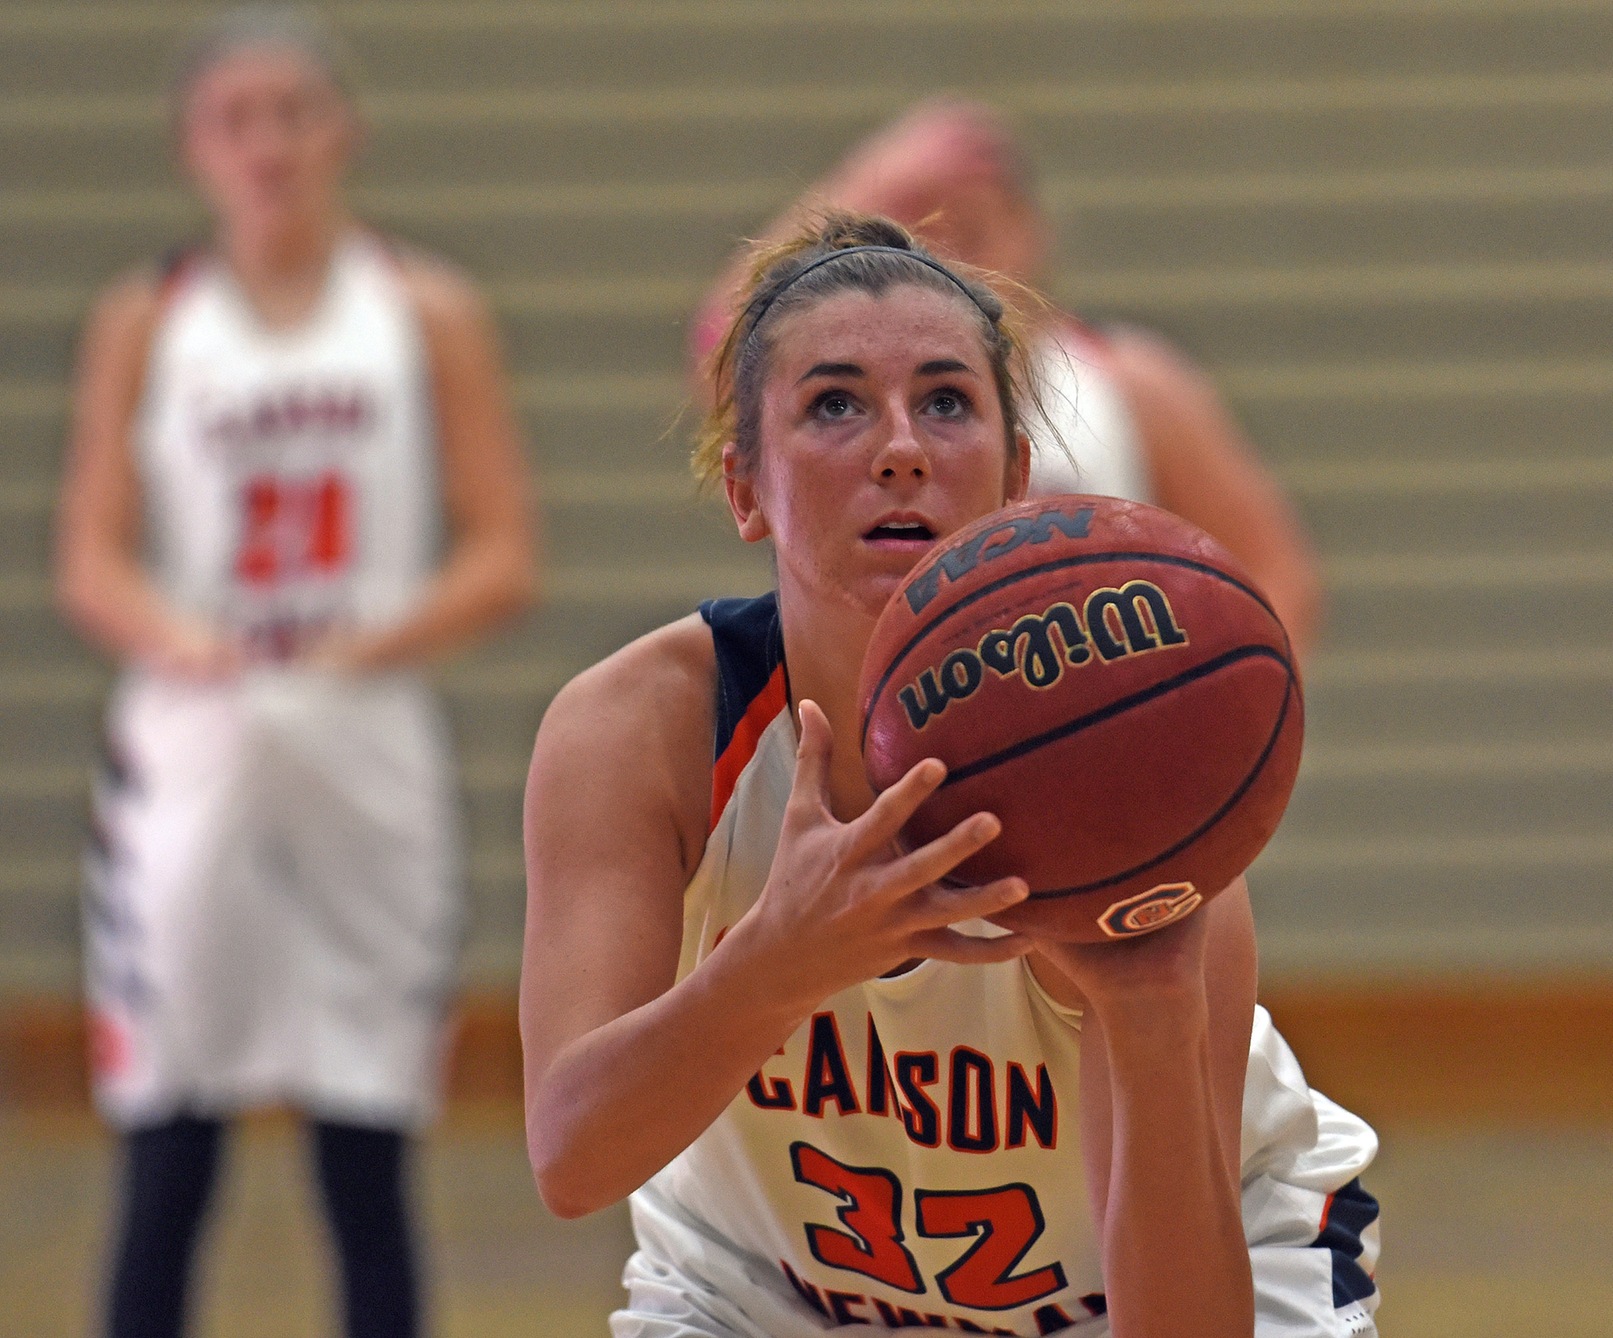 Wester crests 1,000 points as #3 C-N pulls away from Tusculum